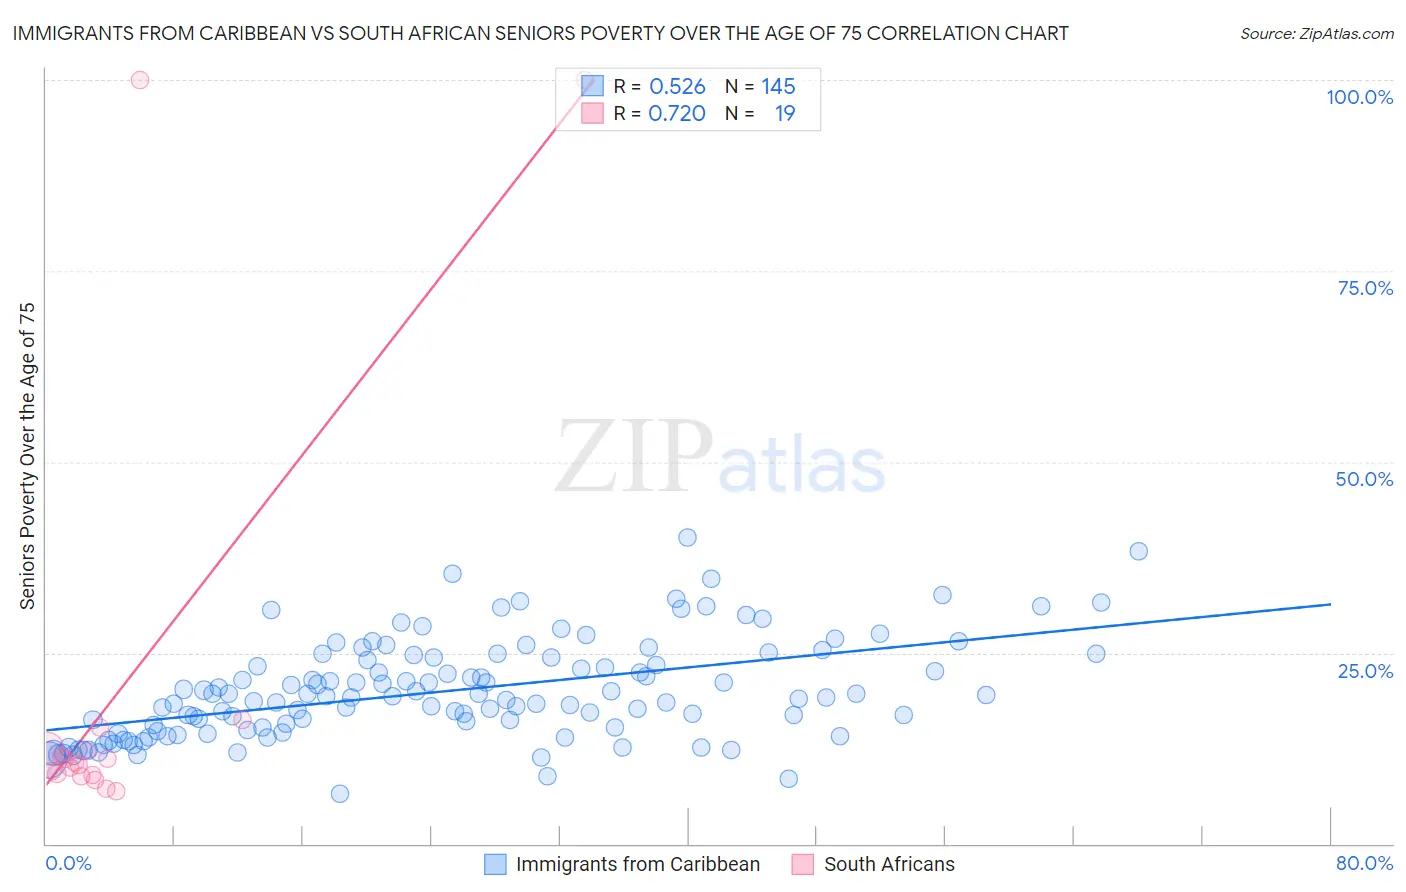 Immigrants from Caribbean vs South African Seniors Poverty Over the Age of 75